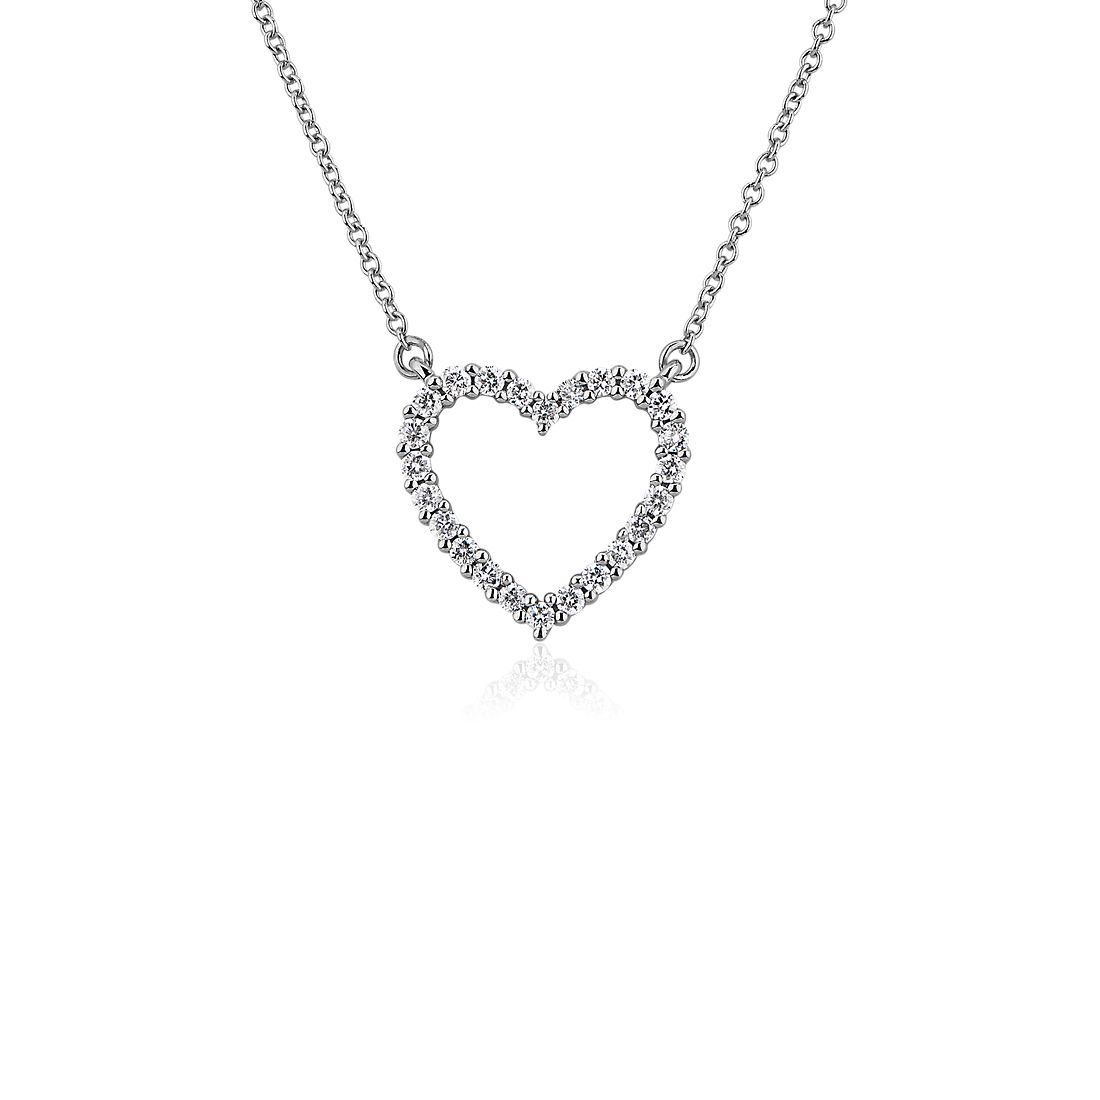 Diamond Heart Shaped Necklace in 14k White Gold (0.23 ct. tw.)